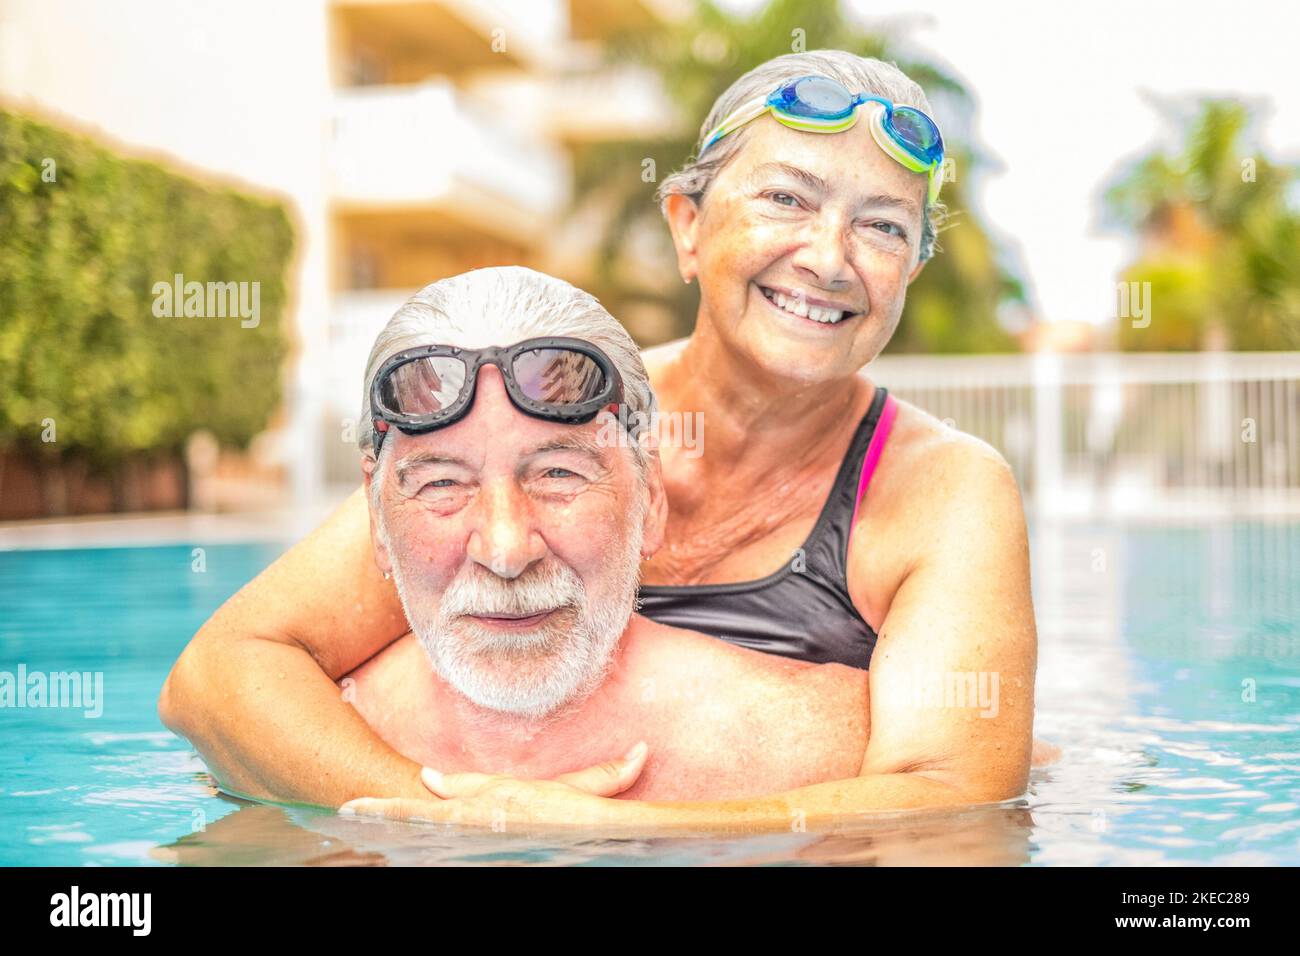 couple of seniors enjoying summer and having fun together in the pool swimming and smiling looking at the camera - cheerful happy people in their vacations - portrait of two mature and retired pesioners Stock Photo